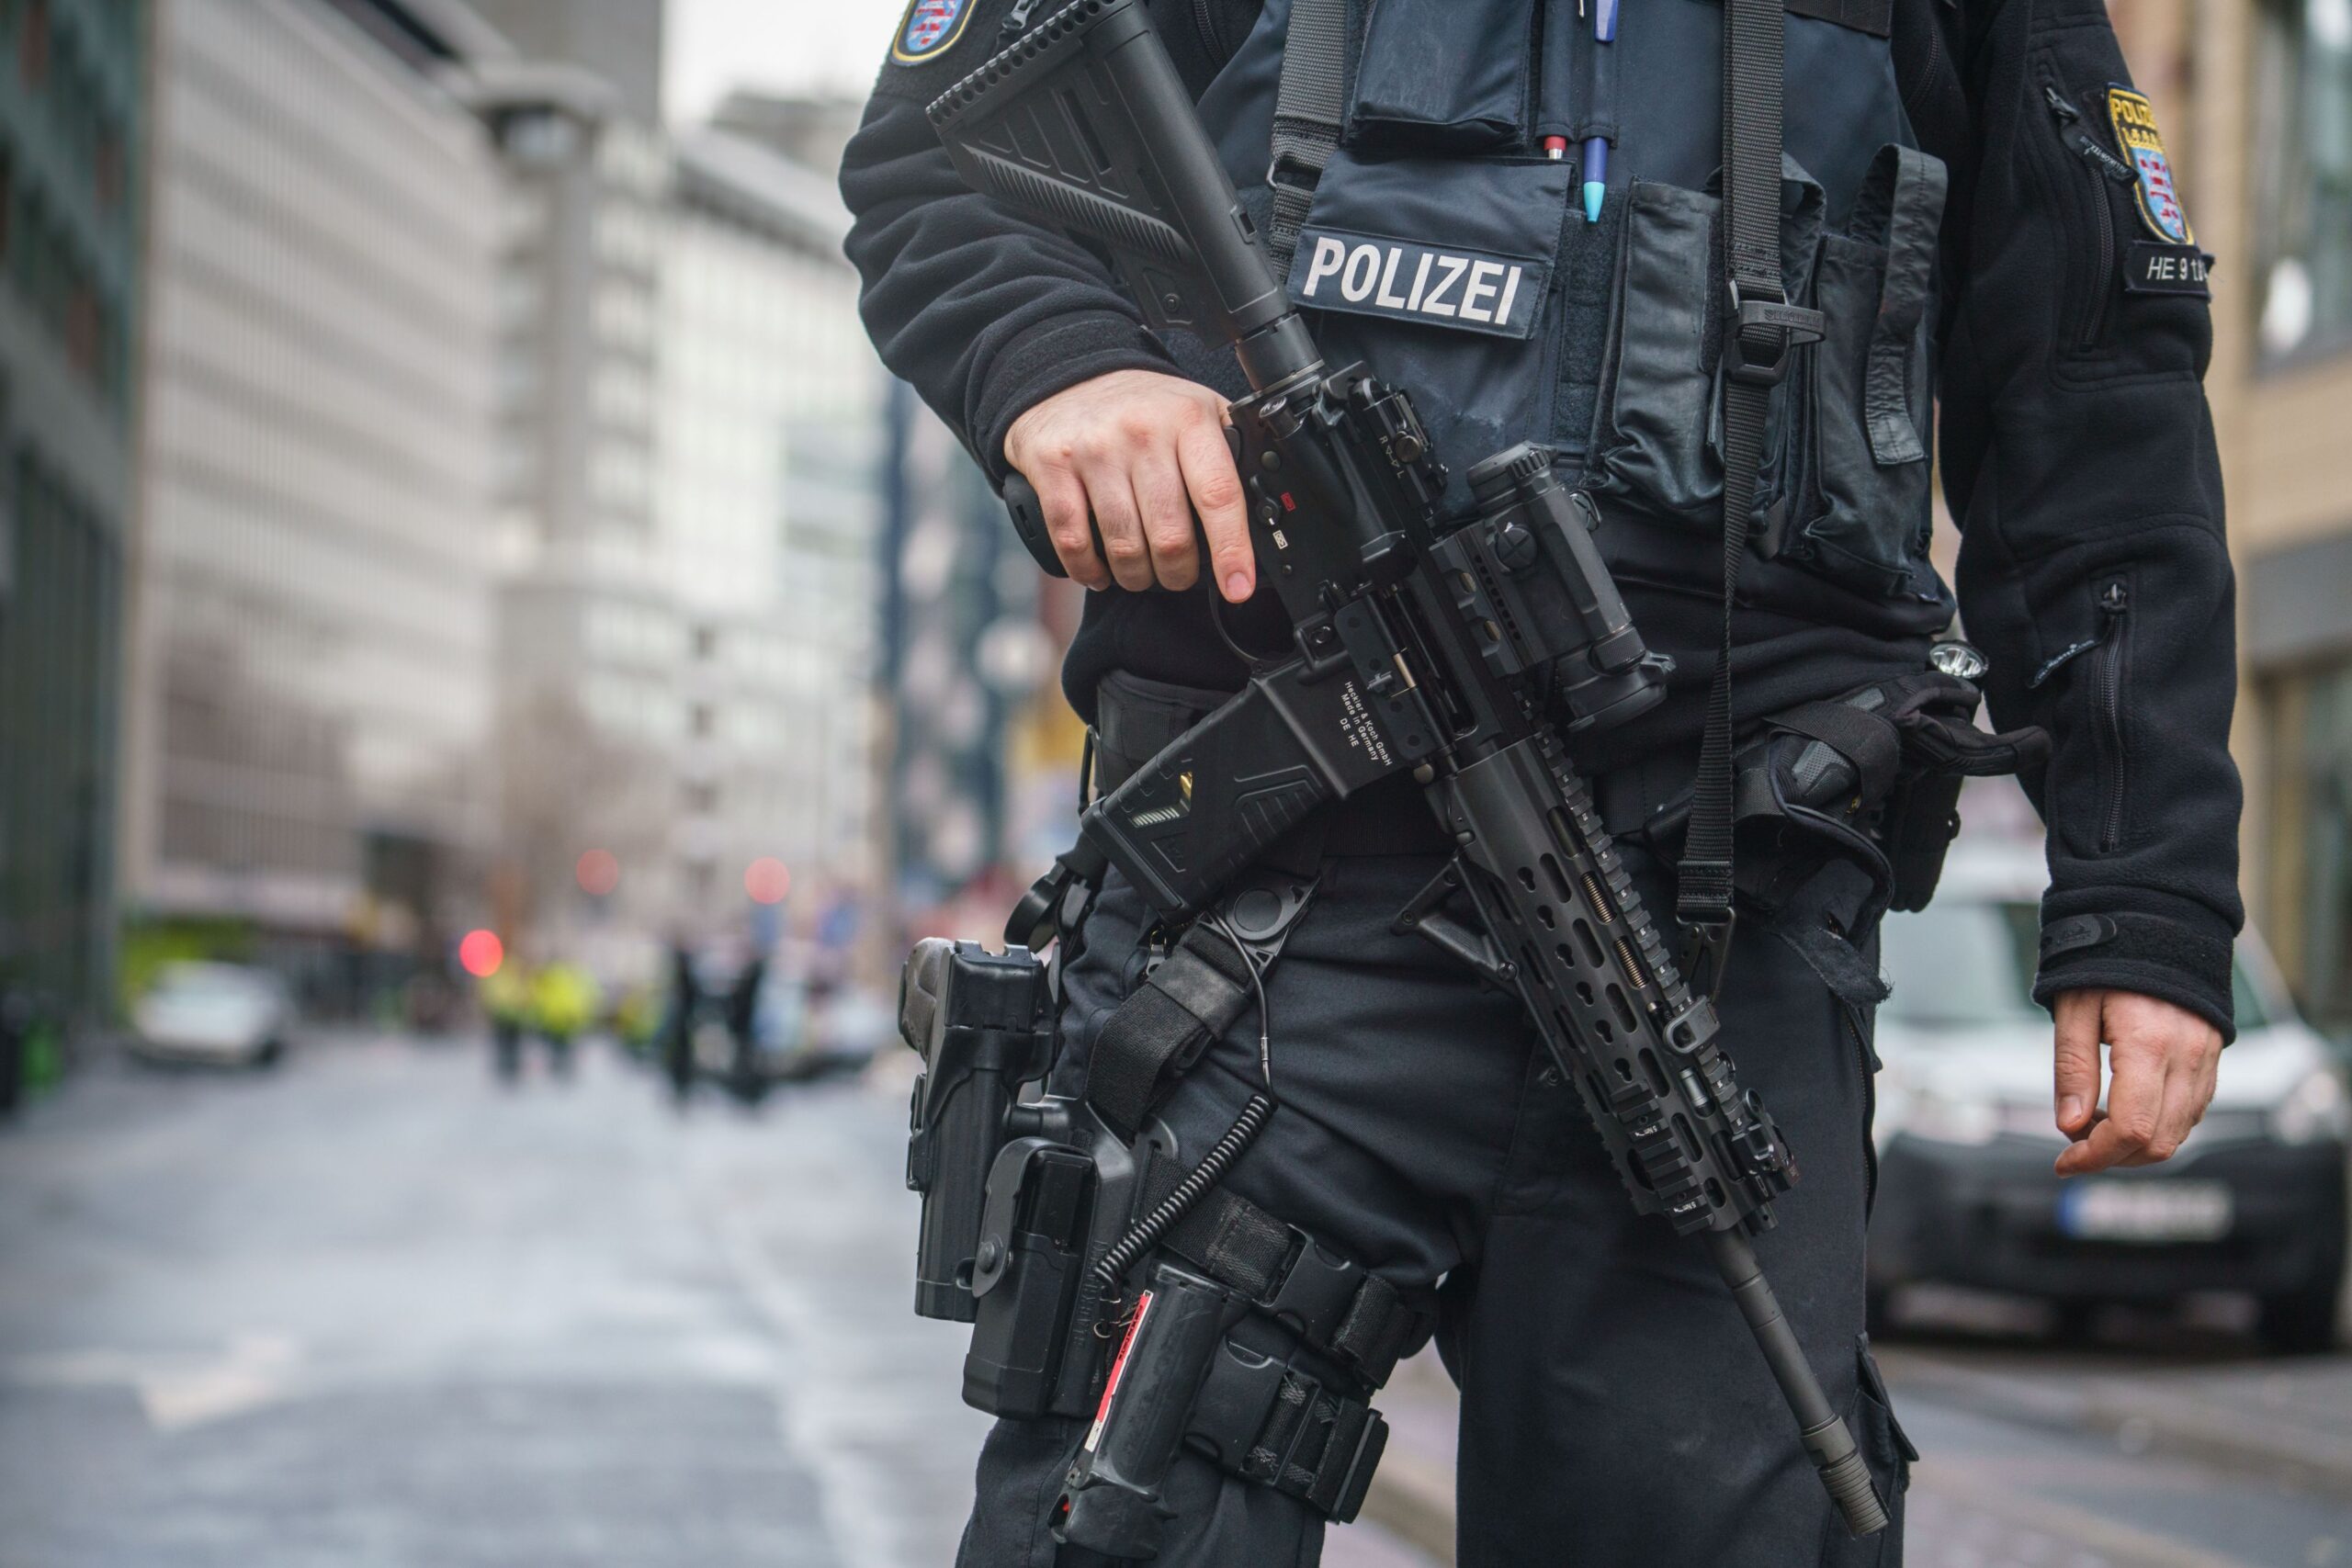 26 January 2021, Hessen, Frankfurt/Main: A police officer cordons off the area in Frankfurt's Bahnhofsviertel district where there was a suspected knife attack this morning that left several people injured. A suspect has been arrested, a police spokesman said. Photo: Frank Rumpenhorst/dpa